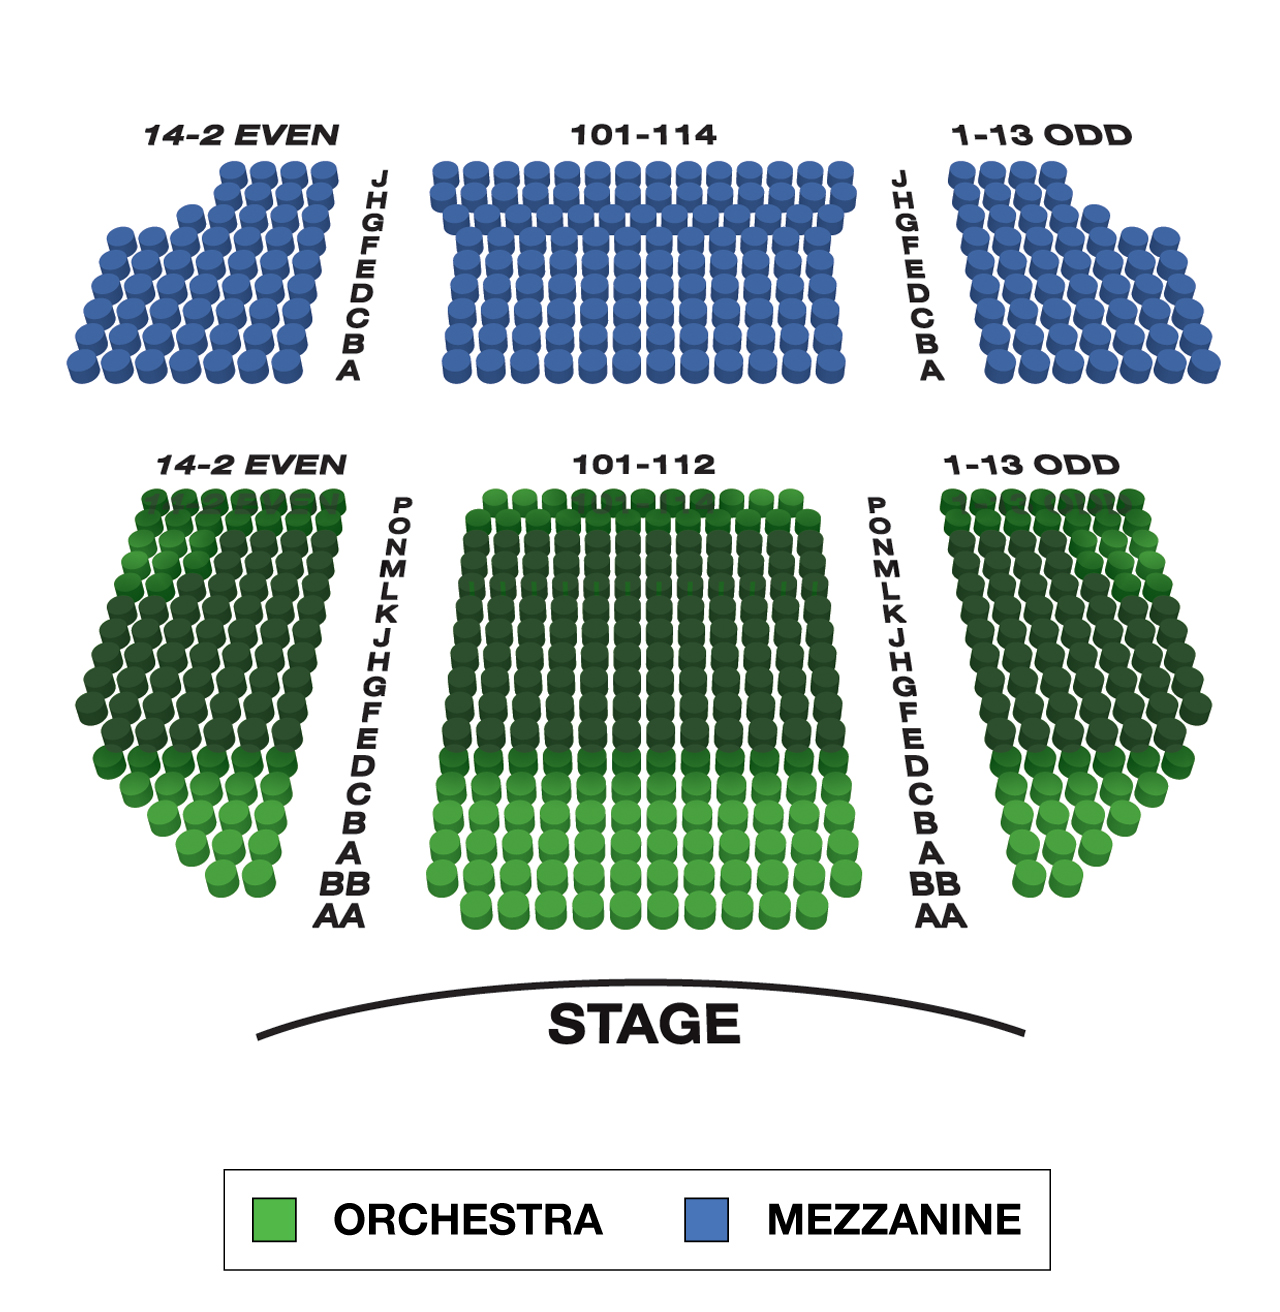 Helen Hayes Theater Seating Chart